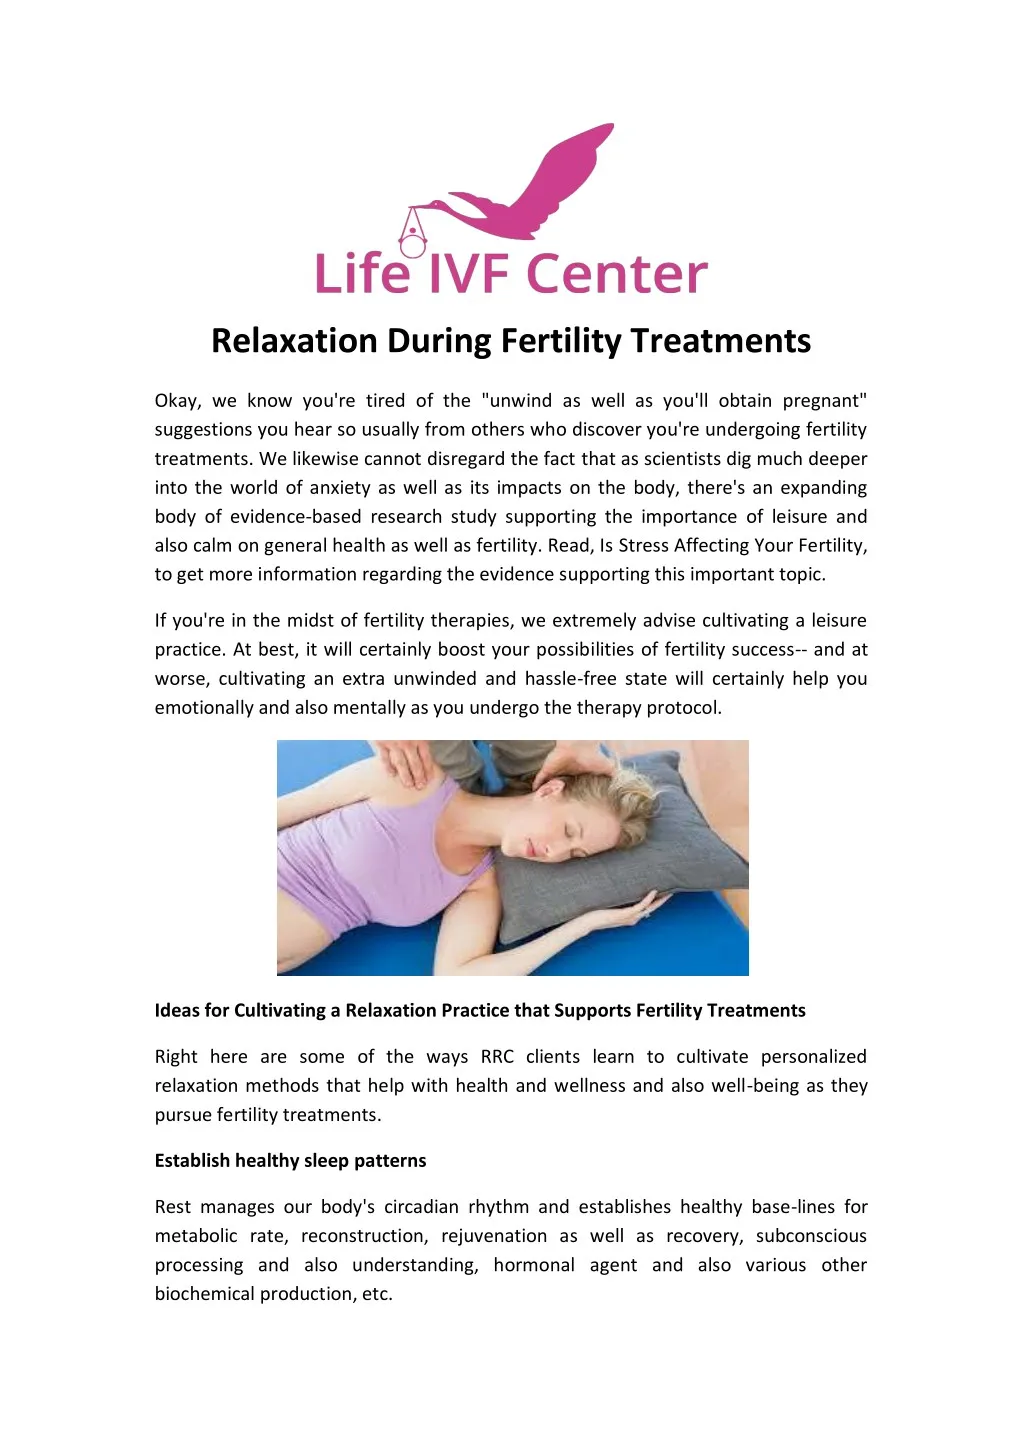 relaxation during fertility treatments